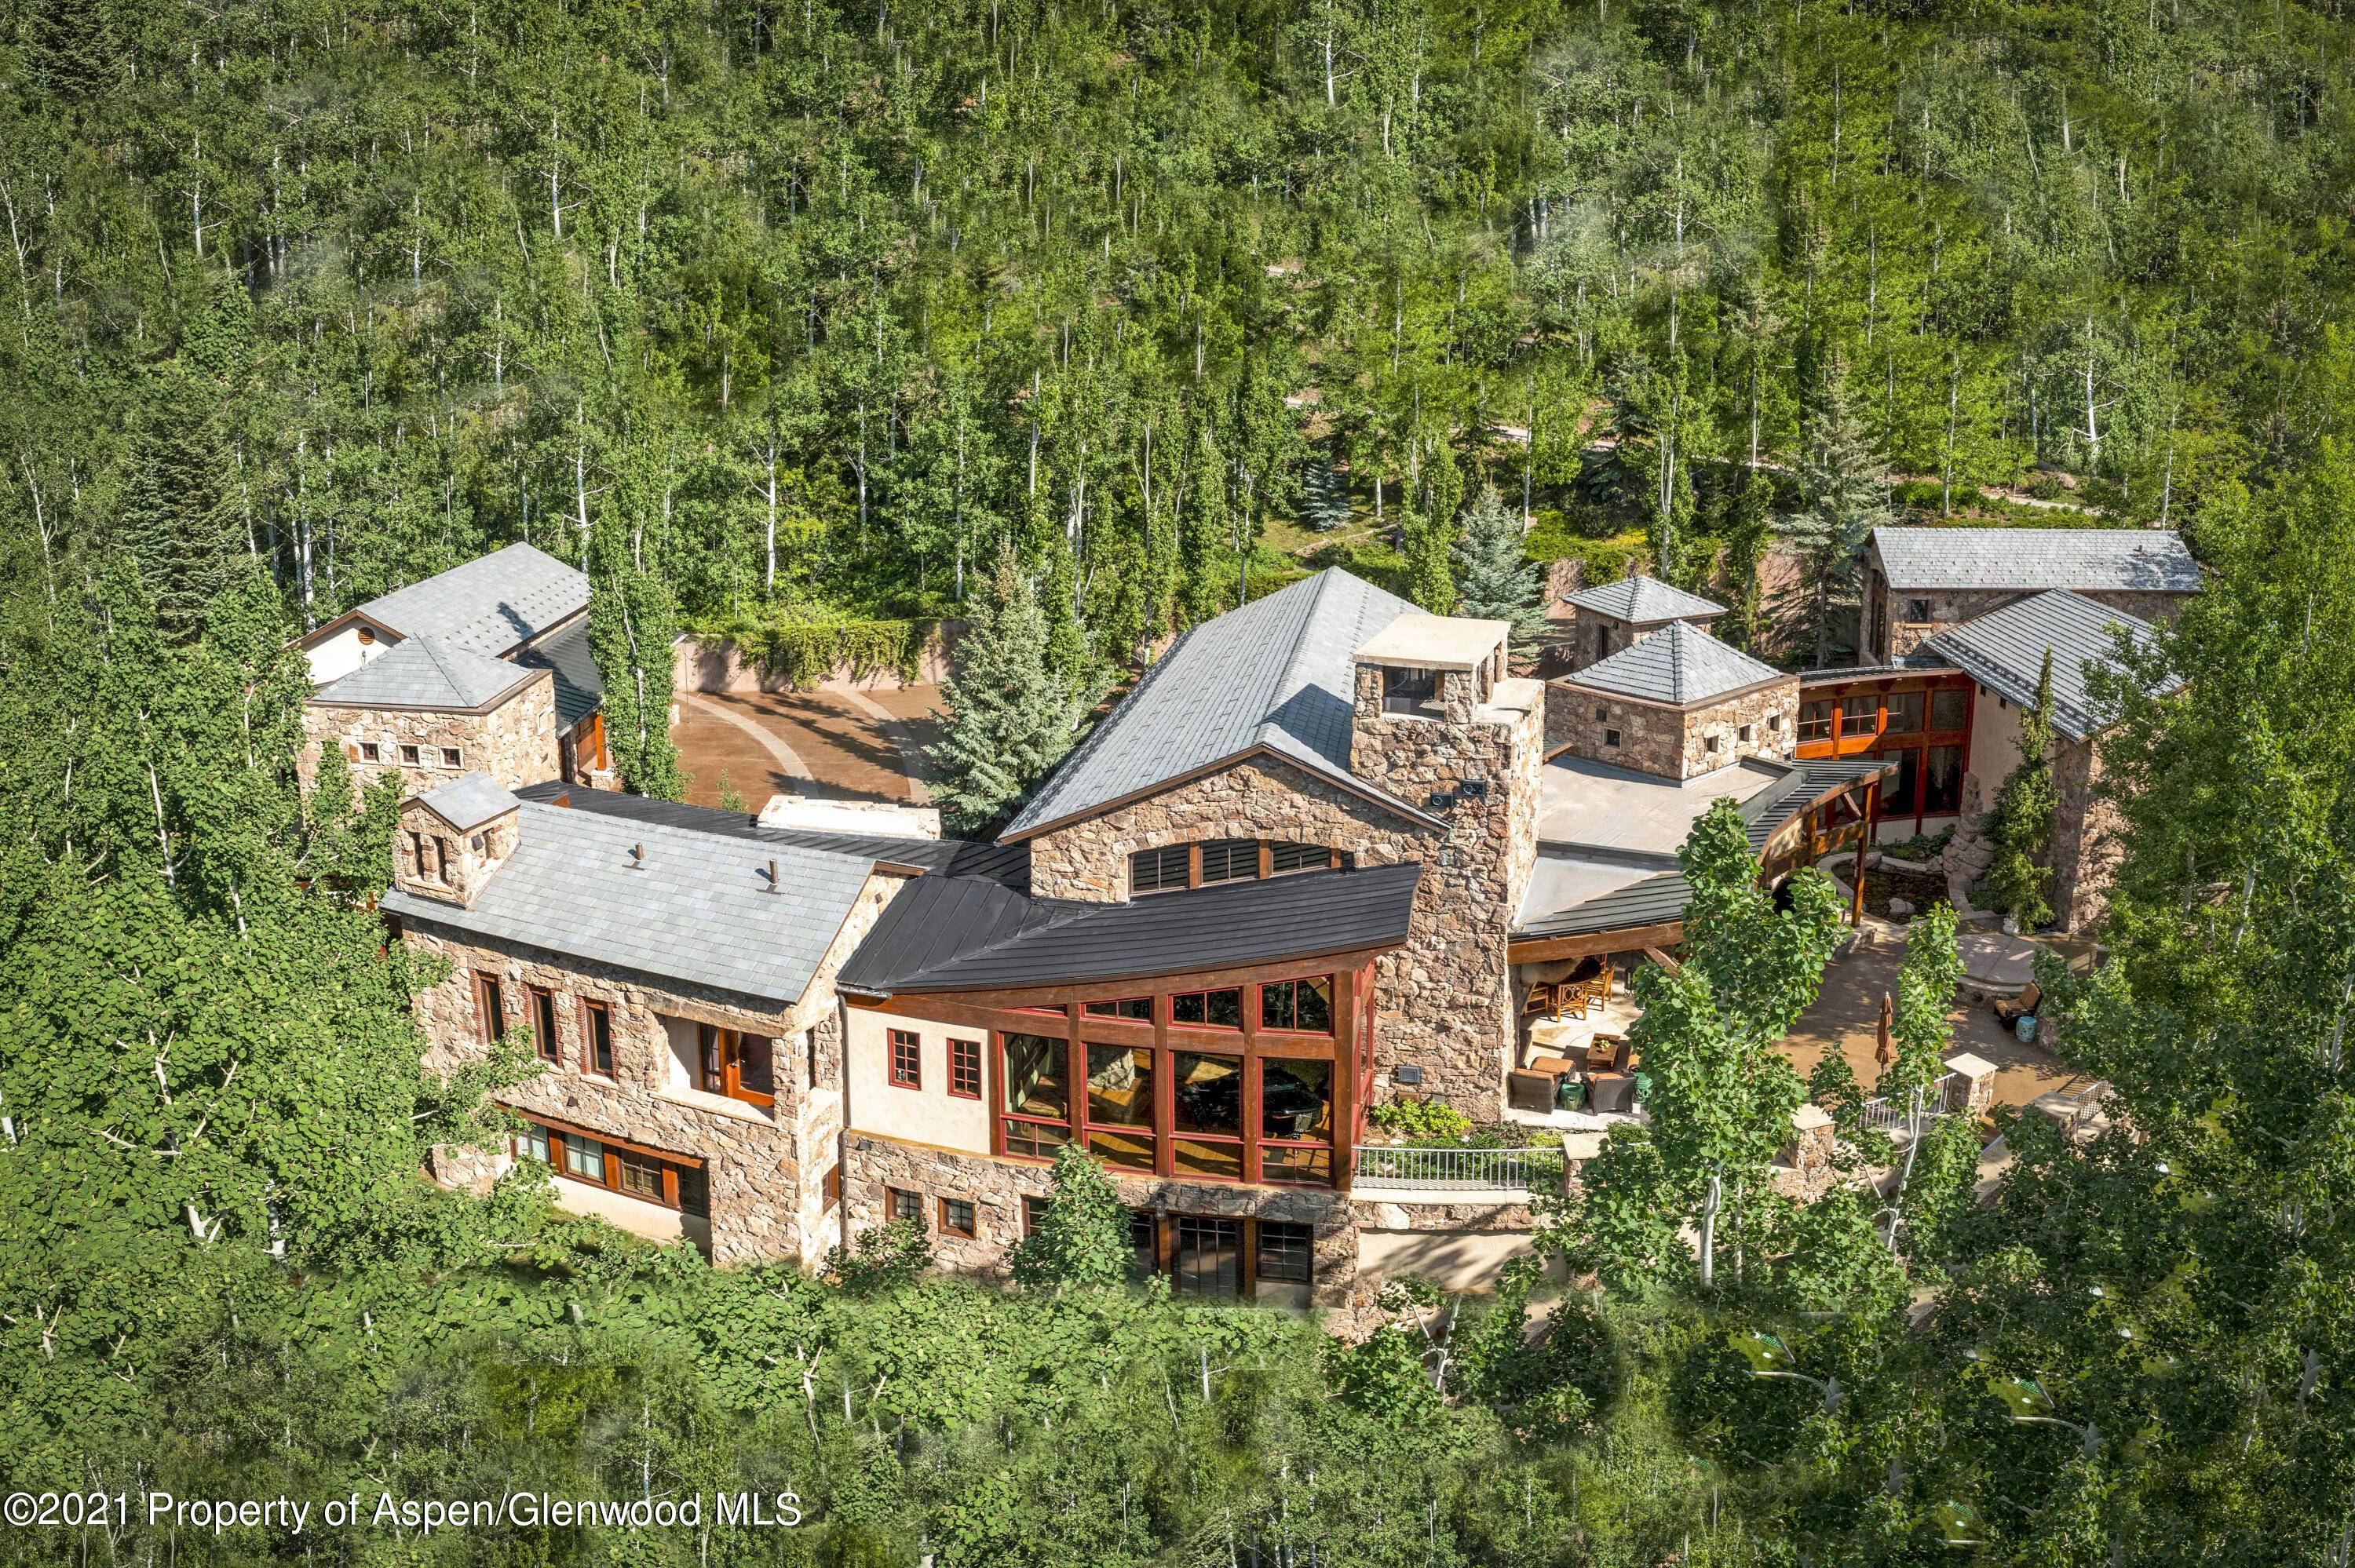 Located at the terminus of secluded Falcon Road in Five Trees, this ski in ski out, 5 bedroom, 9 bath estate embodies architectural artistry, Colorado majesty and ultimate privacy.